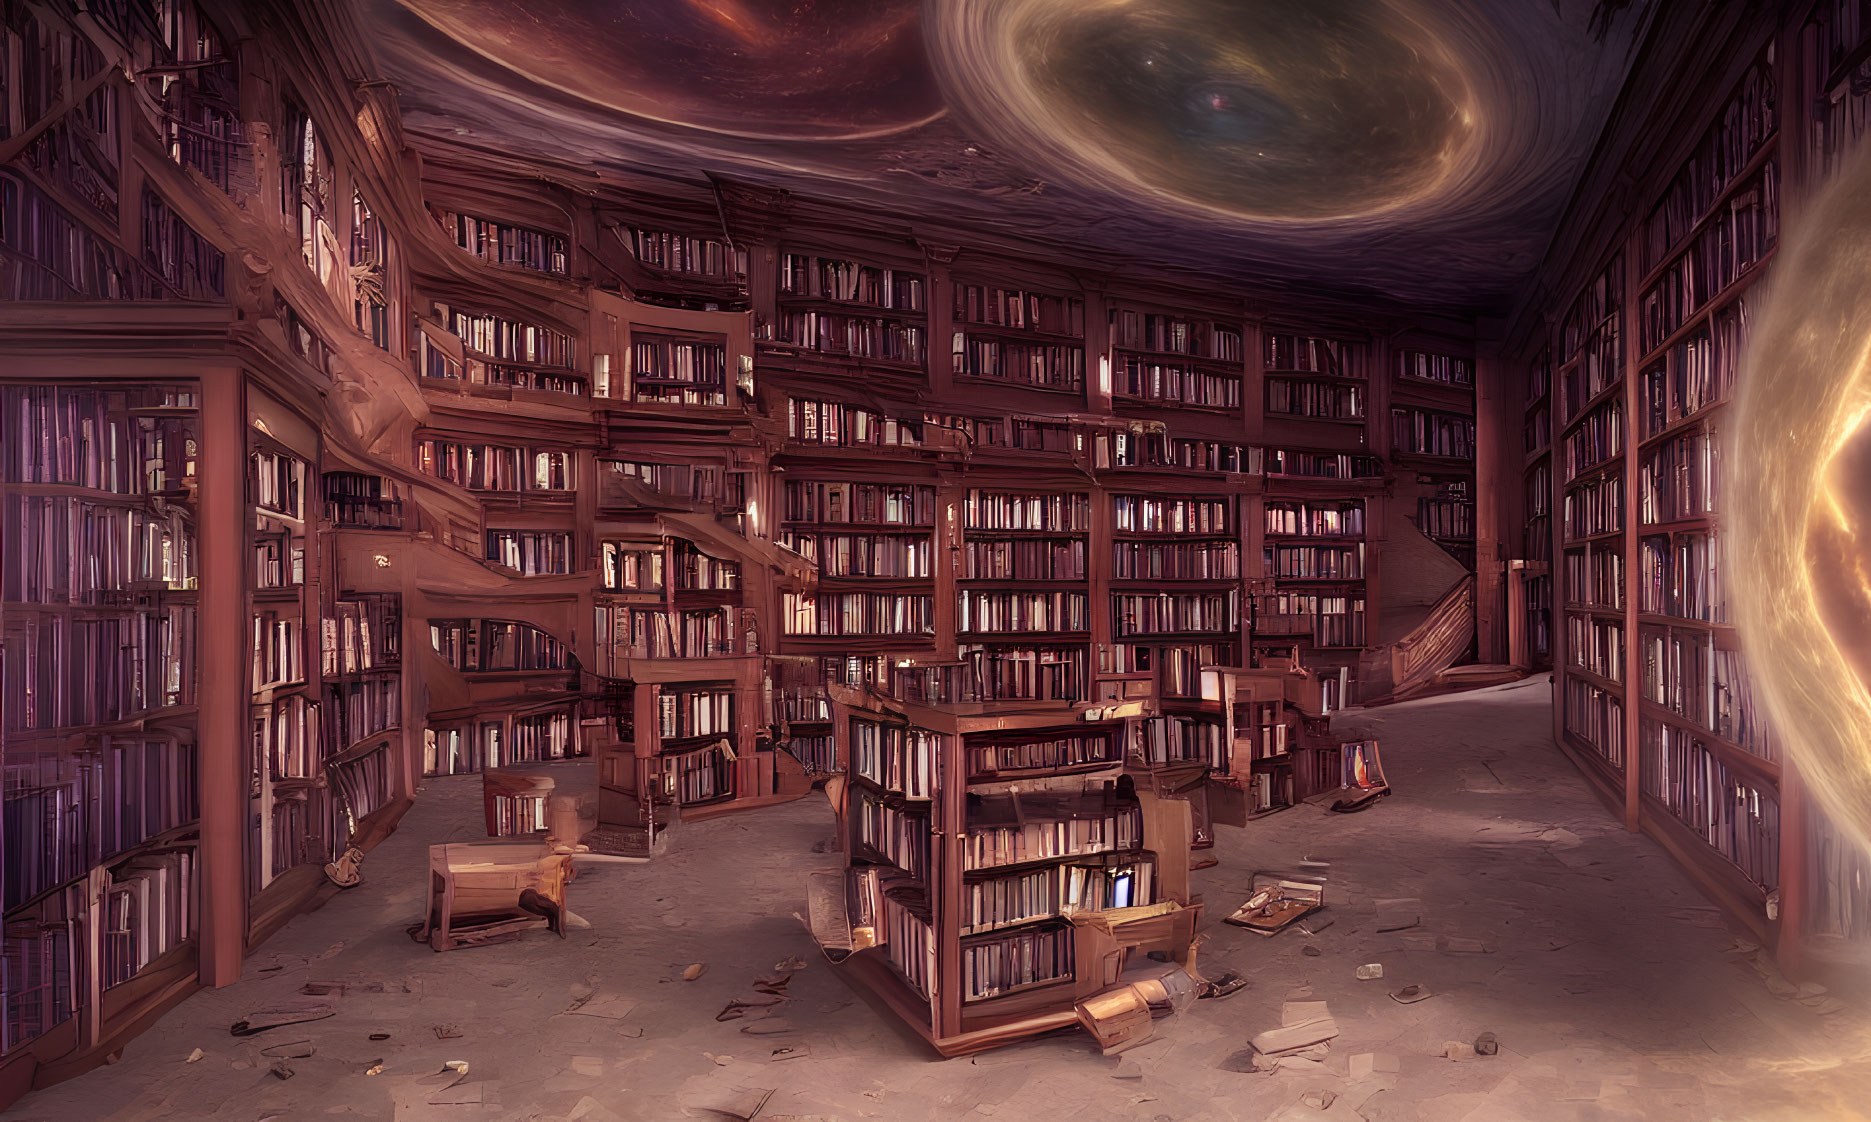 Majestic library with towering bookshelves under cosmic sky